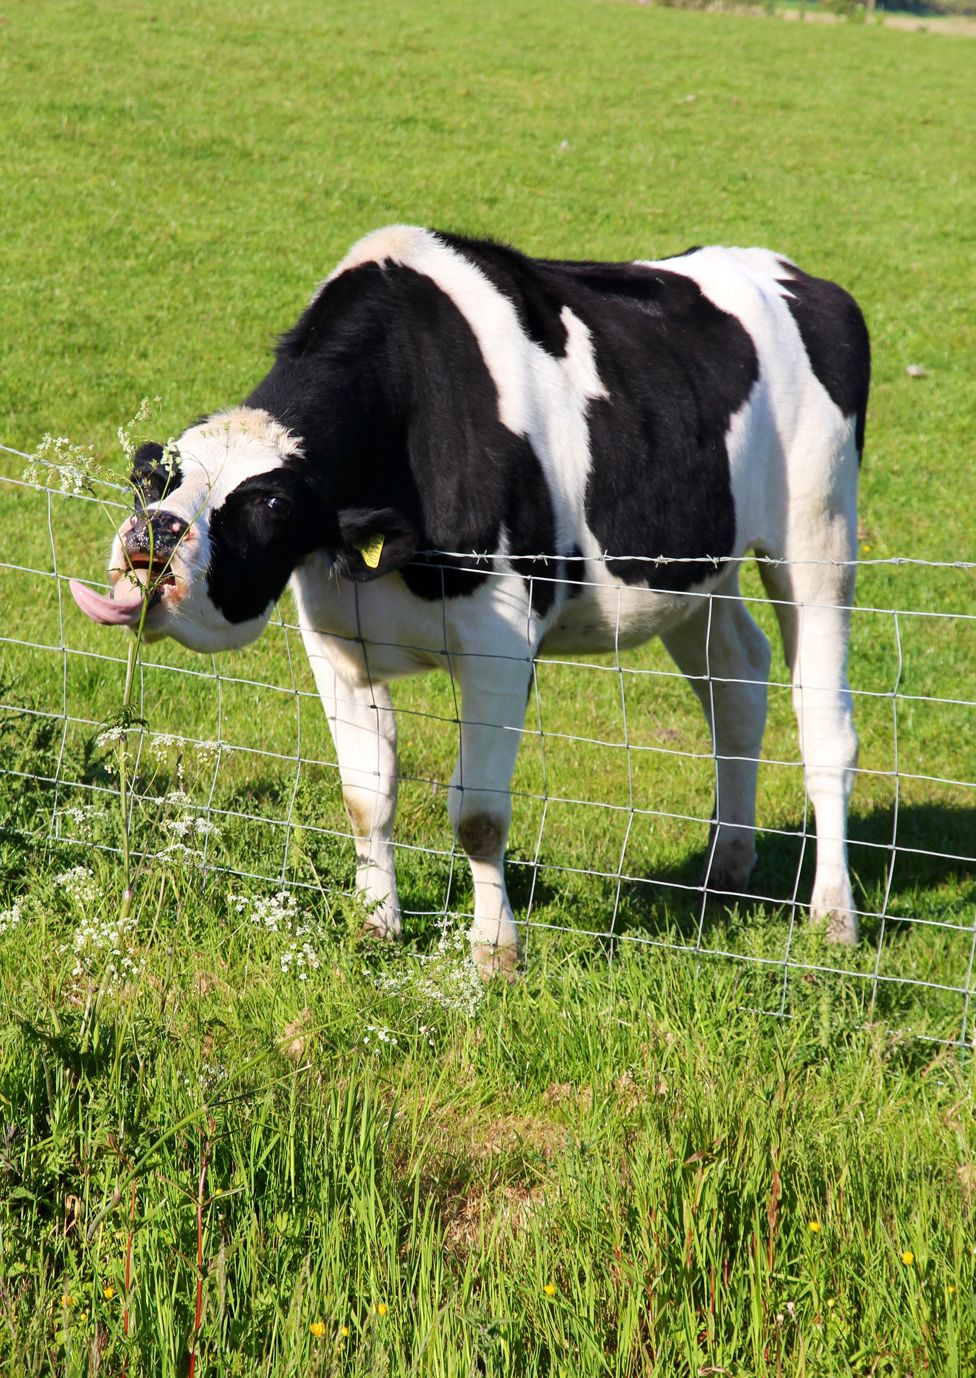 A cow tries to eat a plant through a gap in a fence